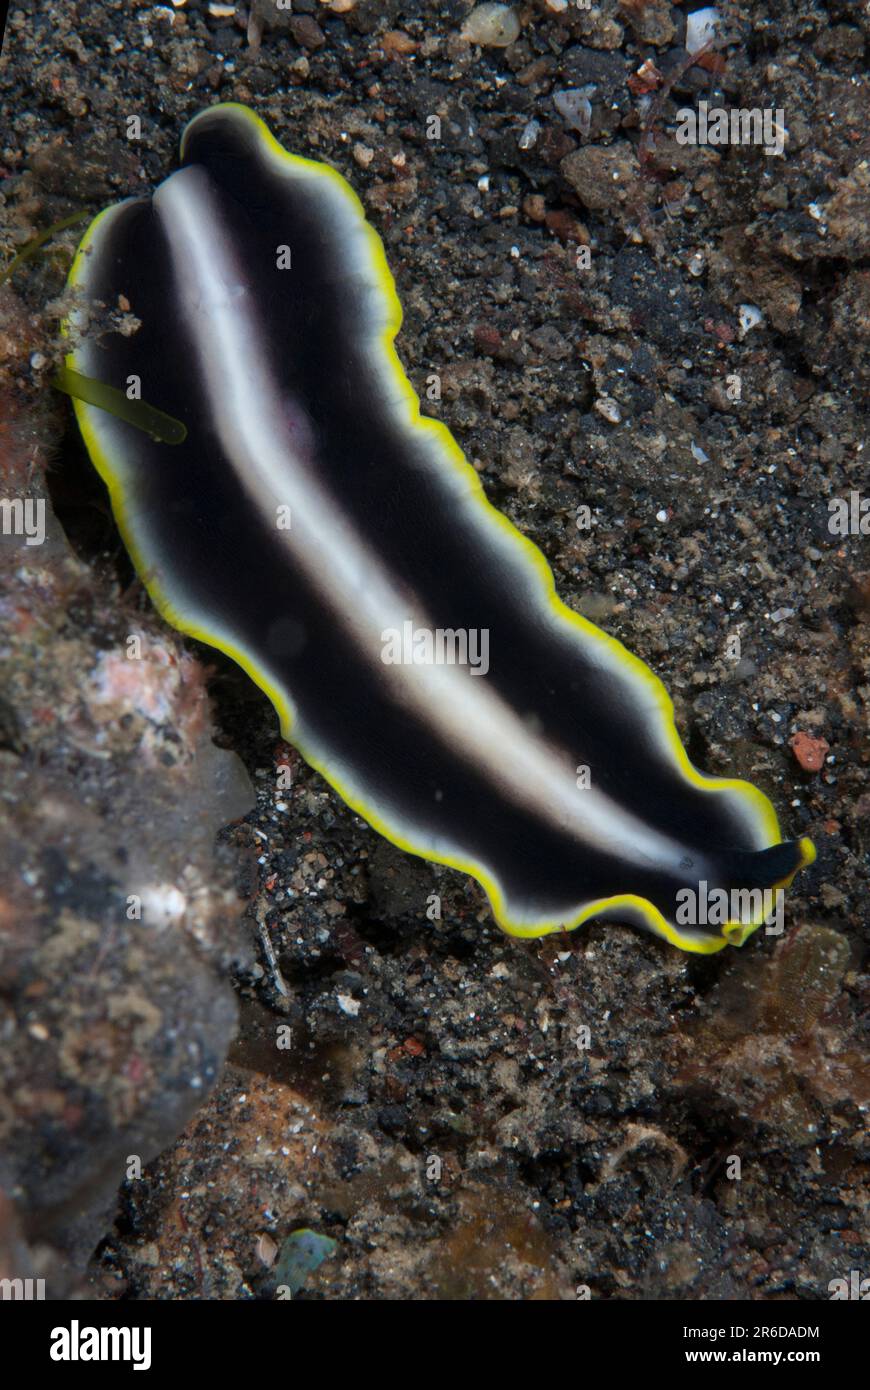 Polyclad Flatworm, Pseudoceros sp, Aer Perang dive site, Lembeh Straits, Sulawesi, Indonesia Stock Photo